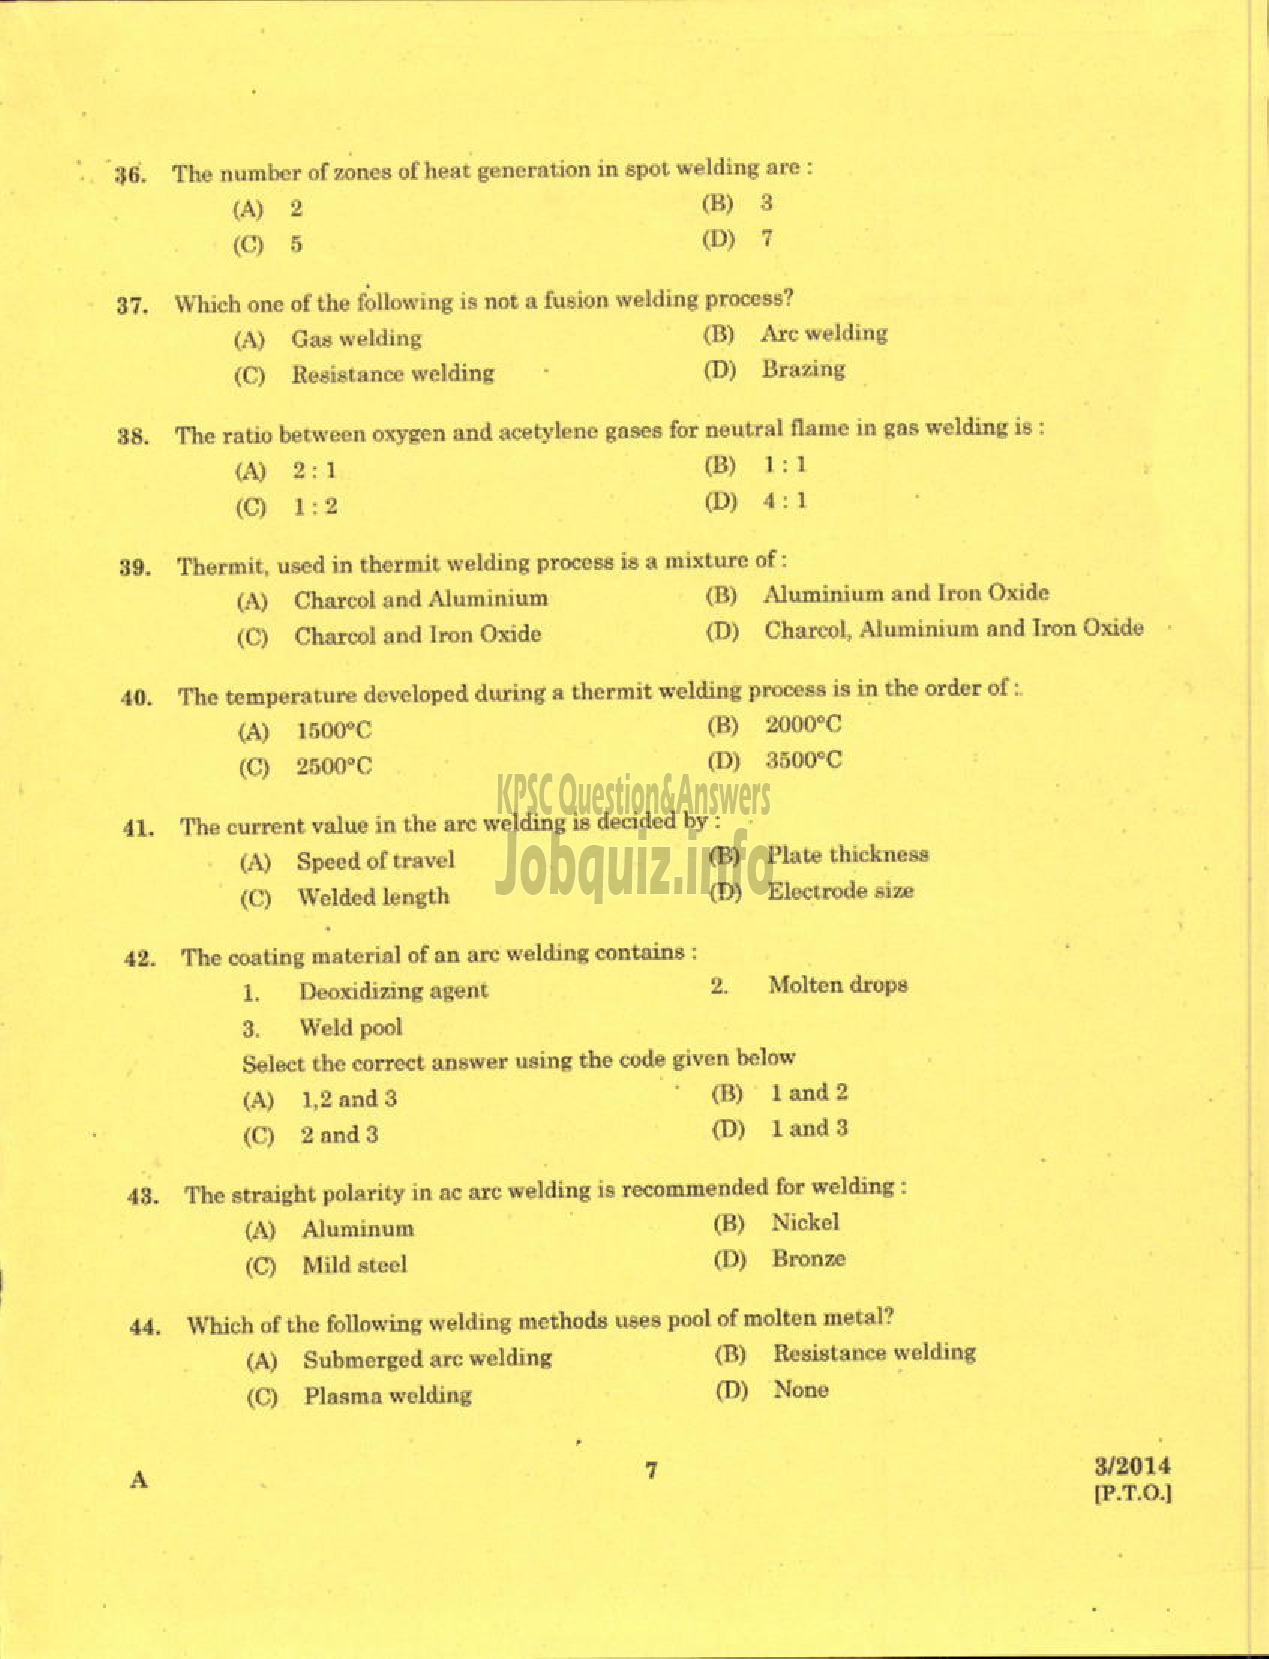 Kerala PSC Question Paper - LECTURER IN MACHANICAL ENGINEERING POLYTECHNICS TECHNICAL EDUCATION-5